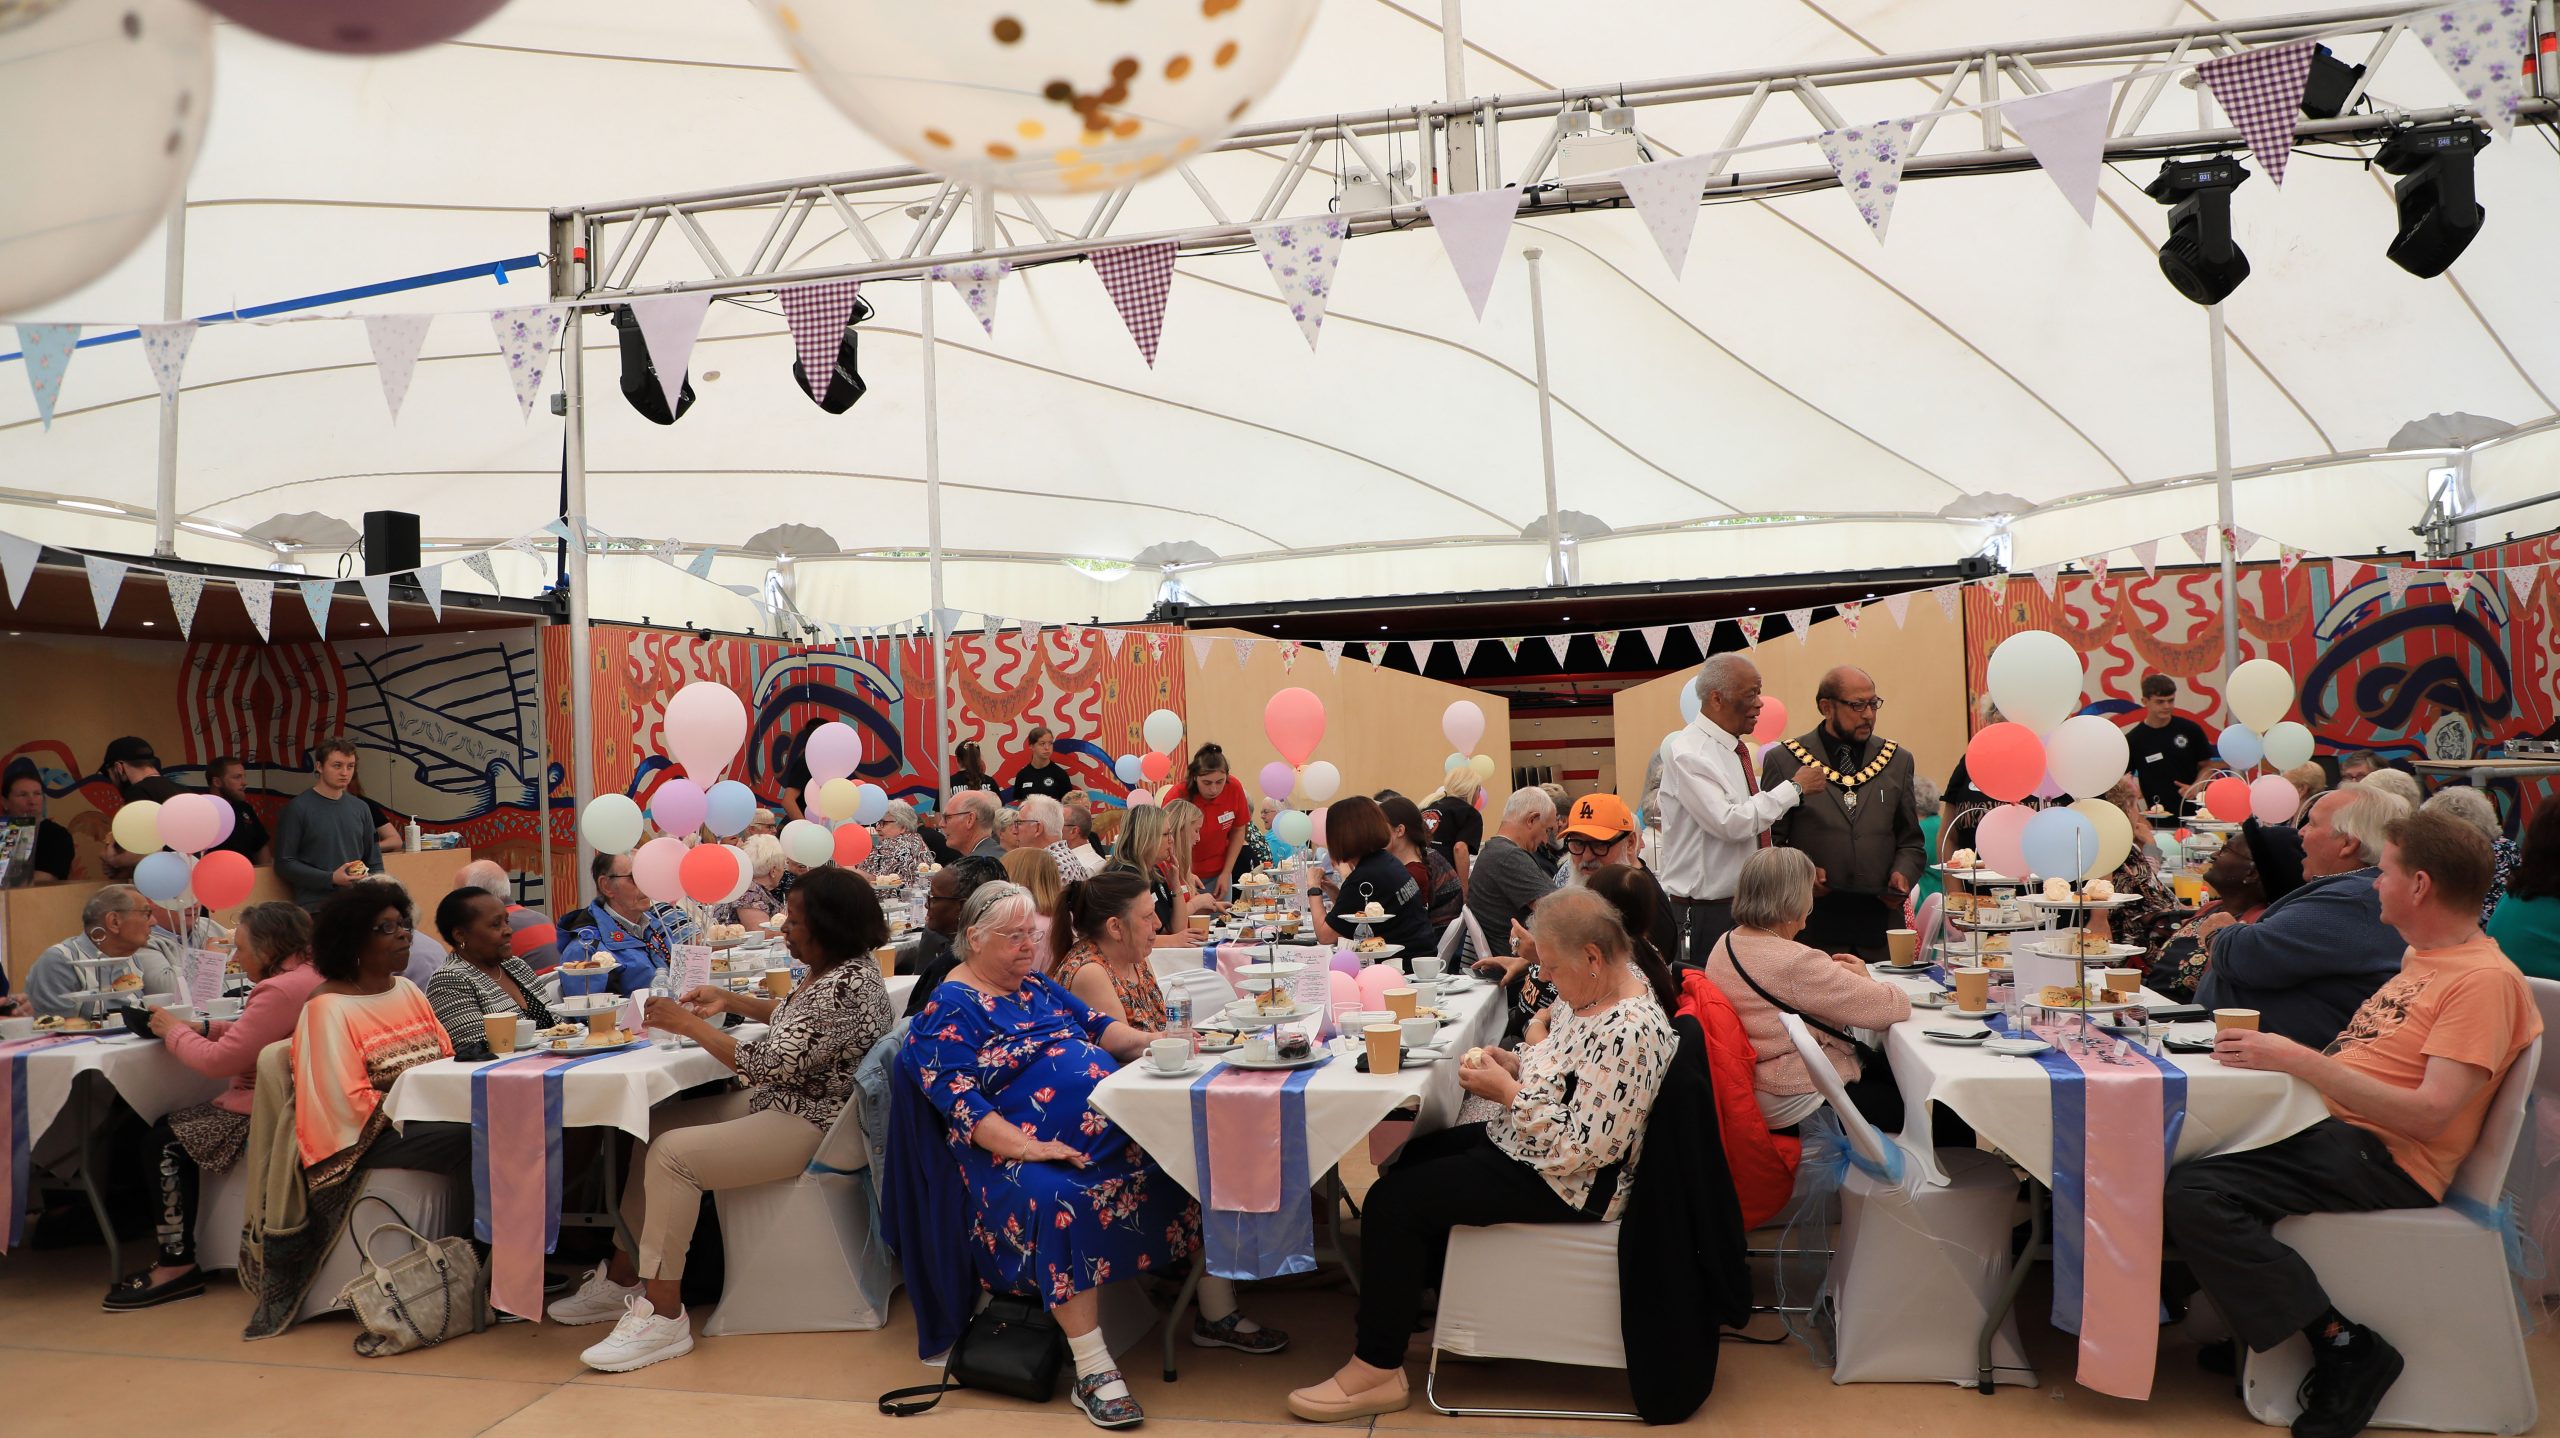 A photograph of the Afternoon Tea event taking place inside the MET. Attendees are sitting at 4 row of table enjoying cake and tea.